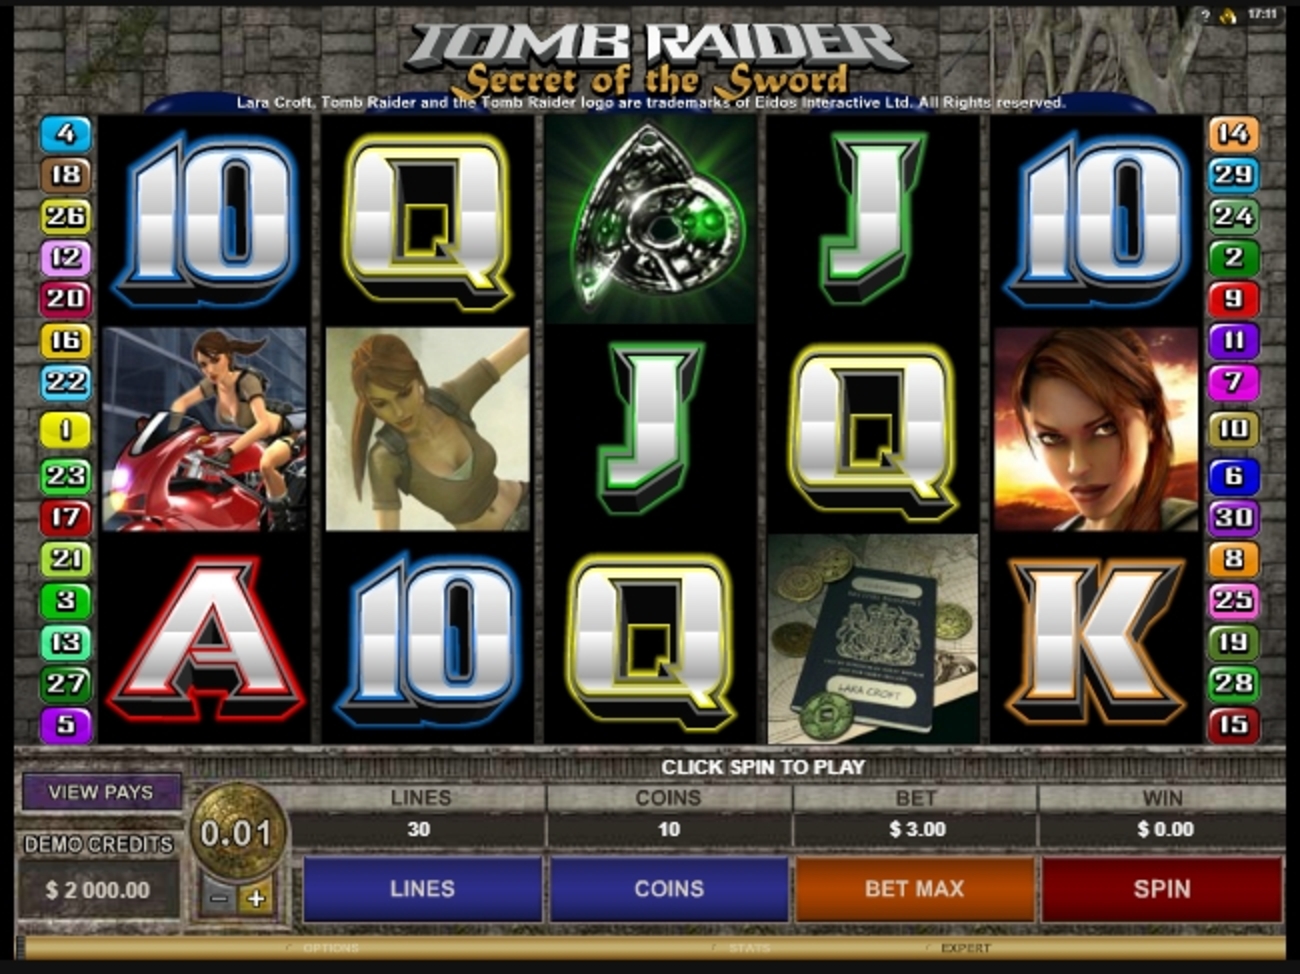 Reels in Tomb Raider Secret of the Sword Slot Game by Microgaming